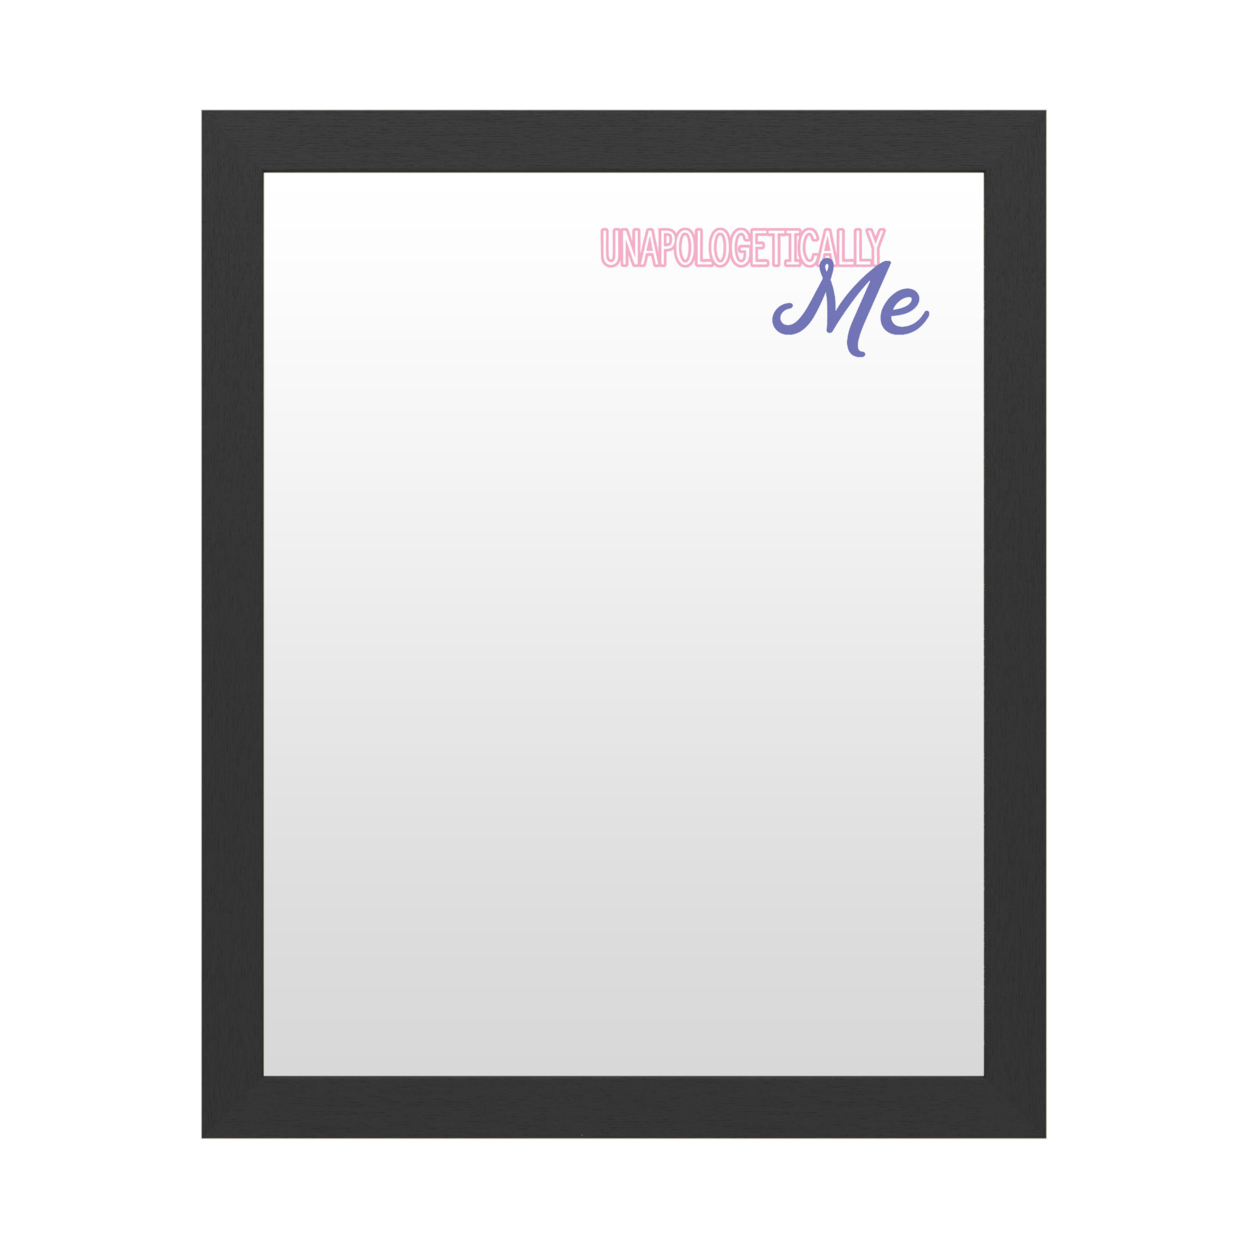 Dry Erase 16 X 20 Marker Board With Printed Artwork - Unapologetically Me White Board - Ready To Hang